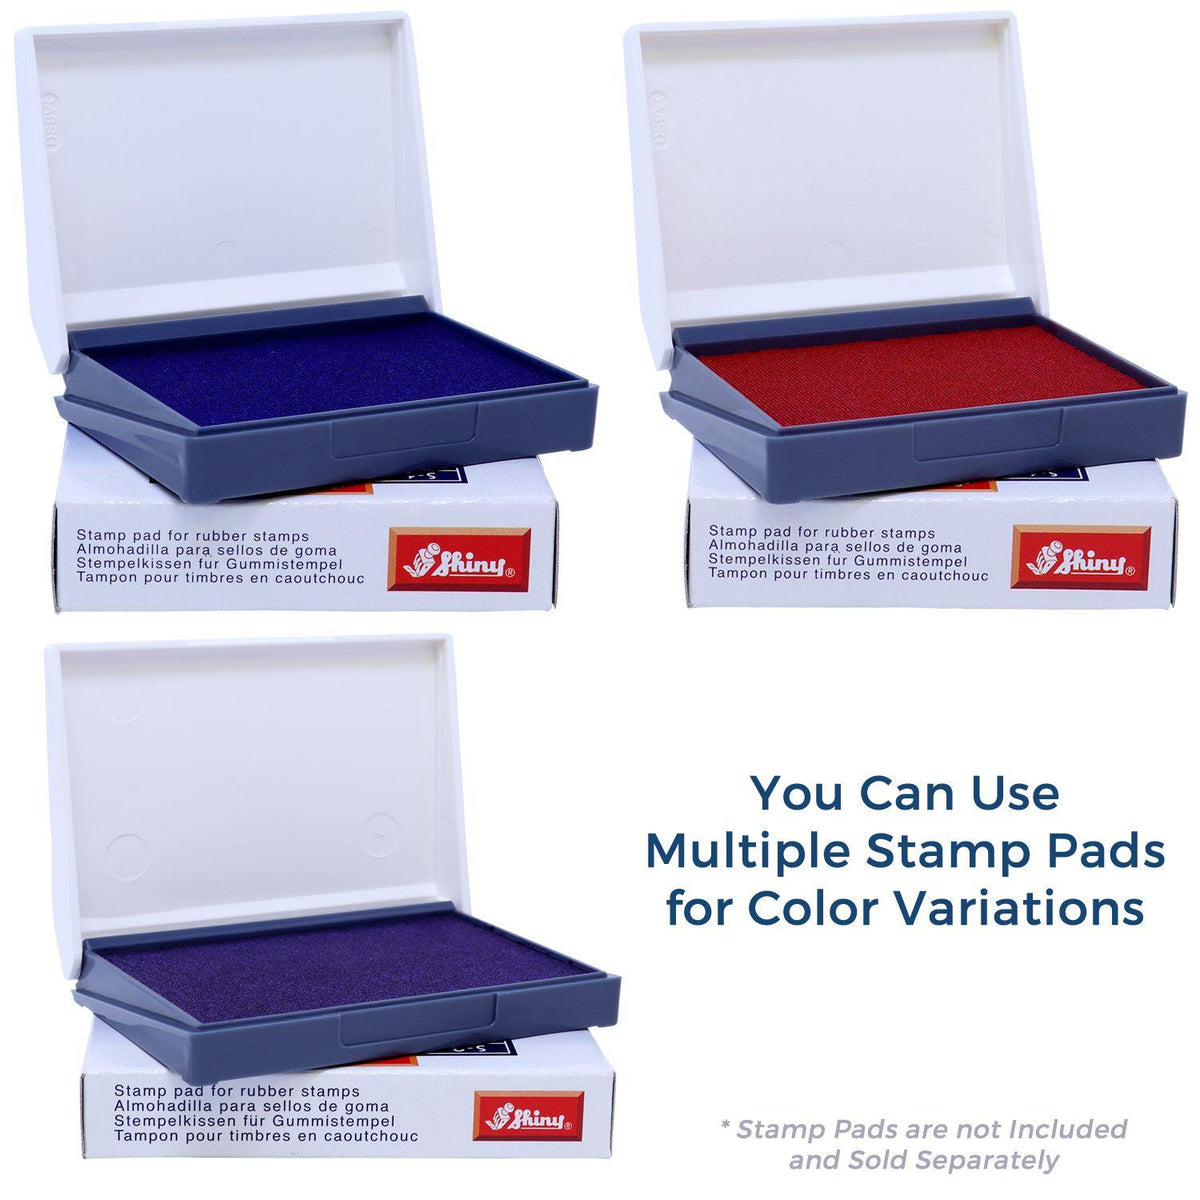 Stamp Pads for Large Duplicate Rubber Stamp Available